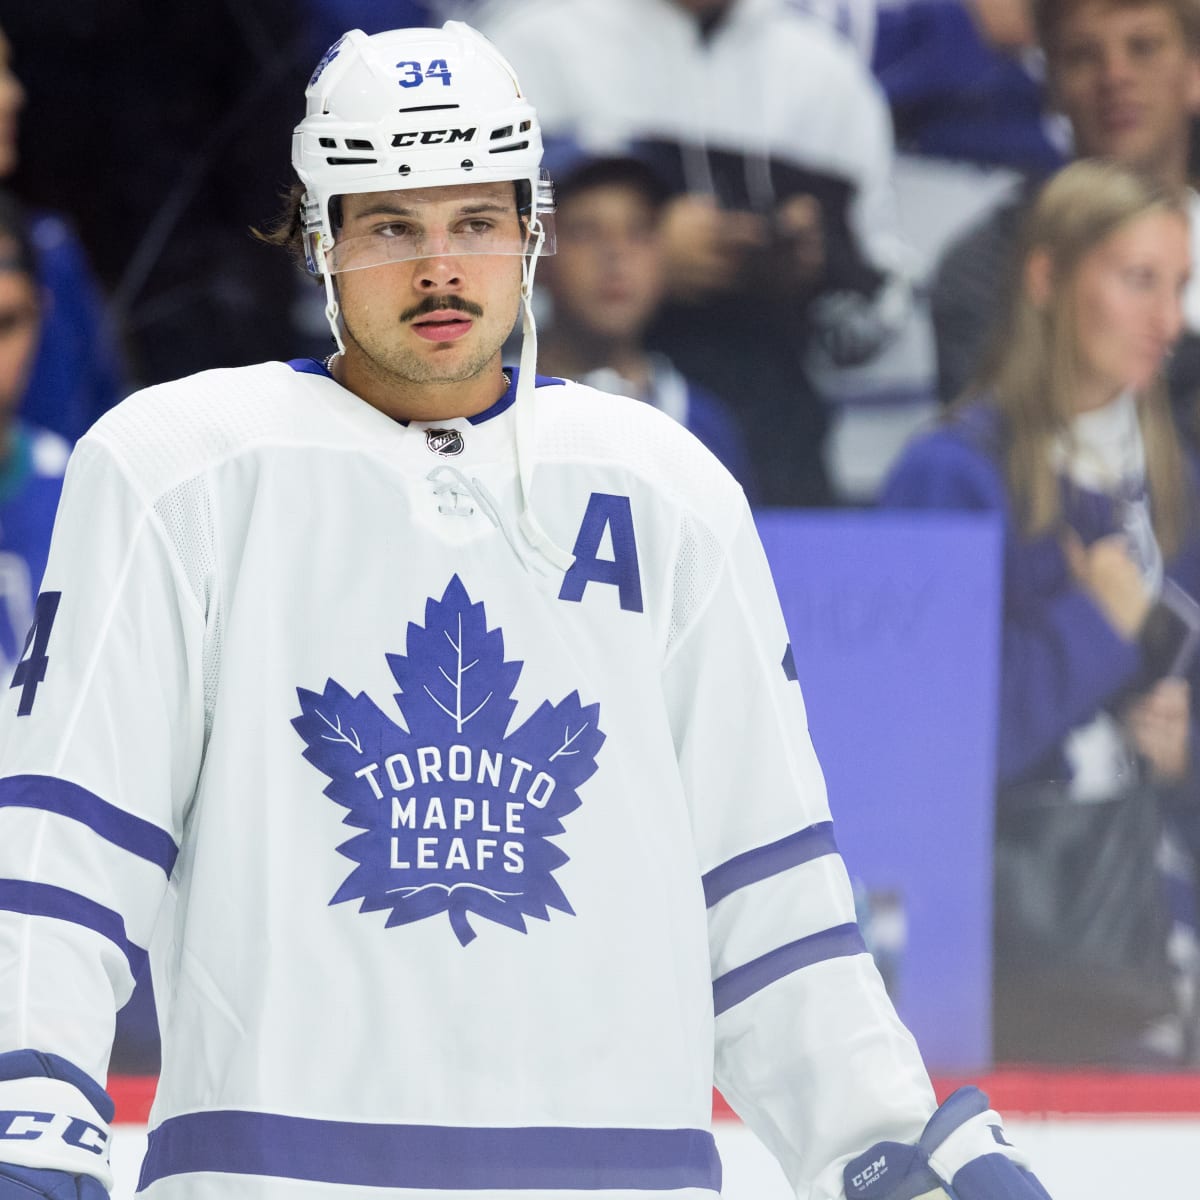 Charges against Auston Matthews dismissed as Leafs star reaches